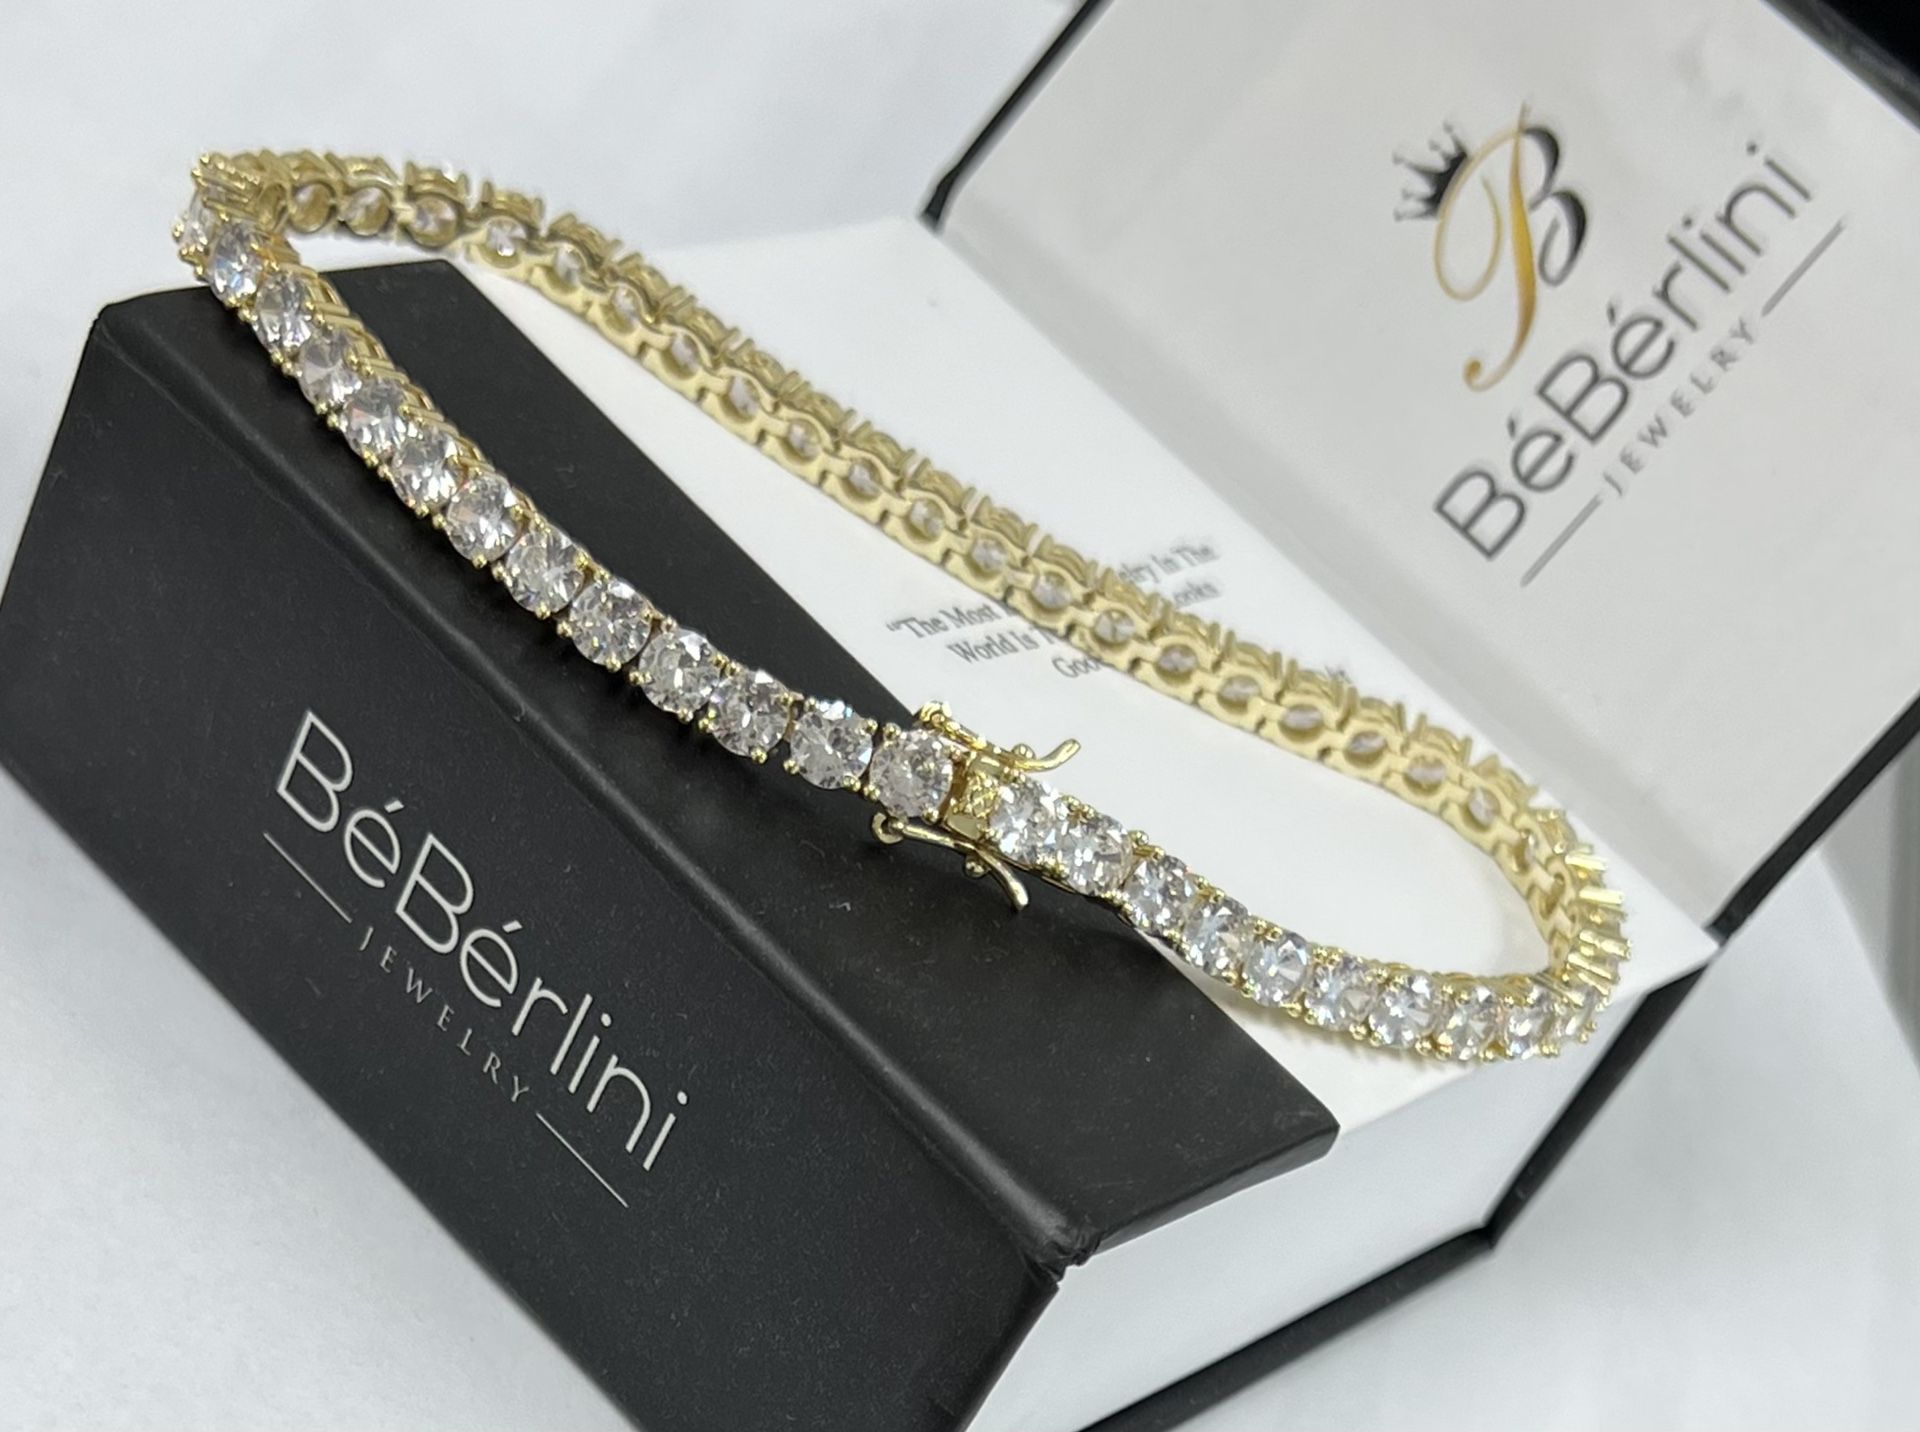 💥Tennis Anklet 💥Made Of 14k Layered & Bonded Gold Over Precious Metal, Hypoallergenic High Quality-